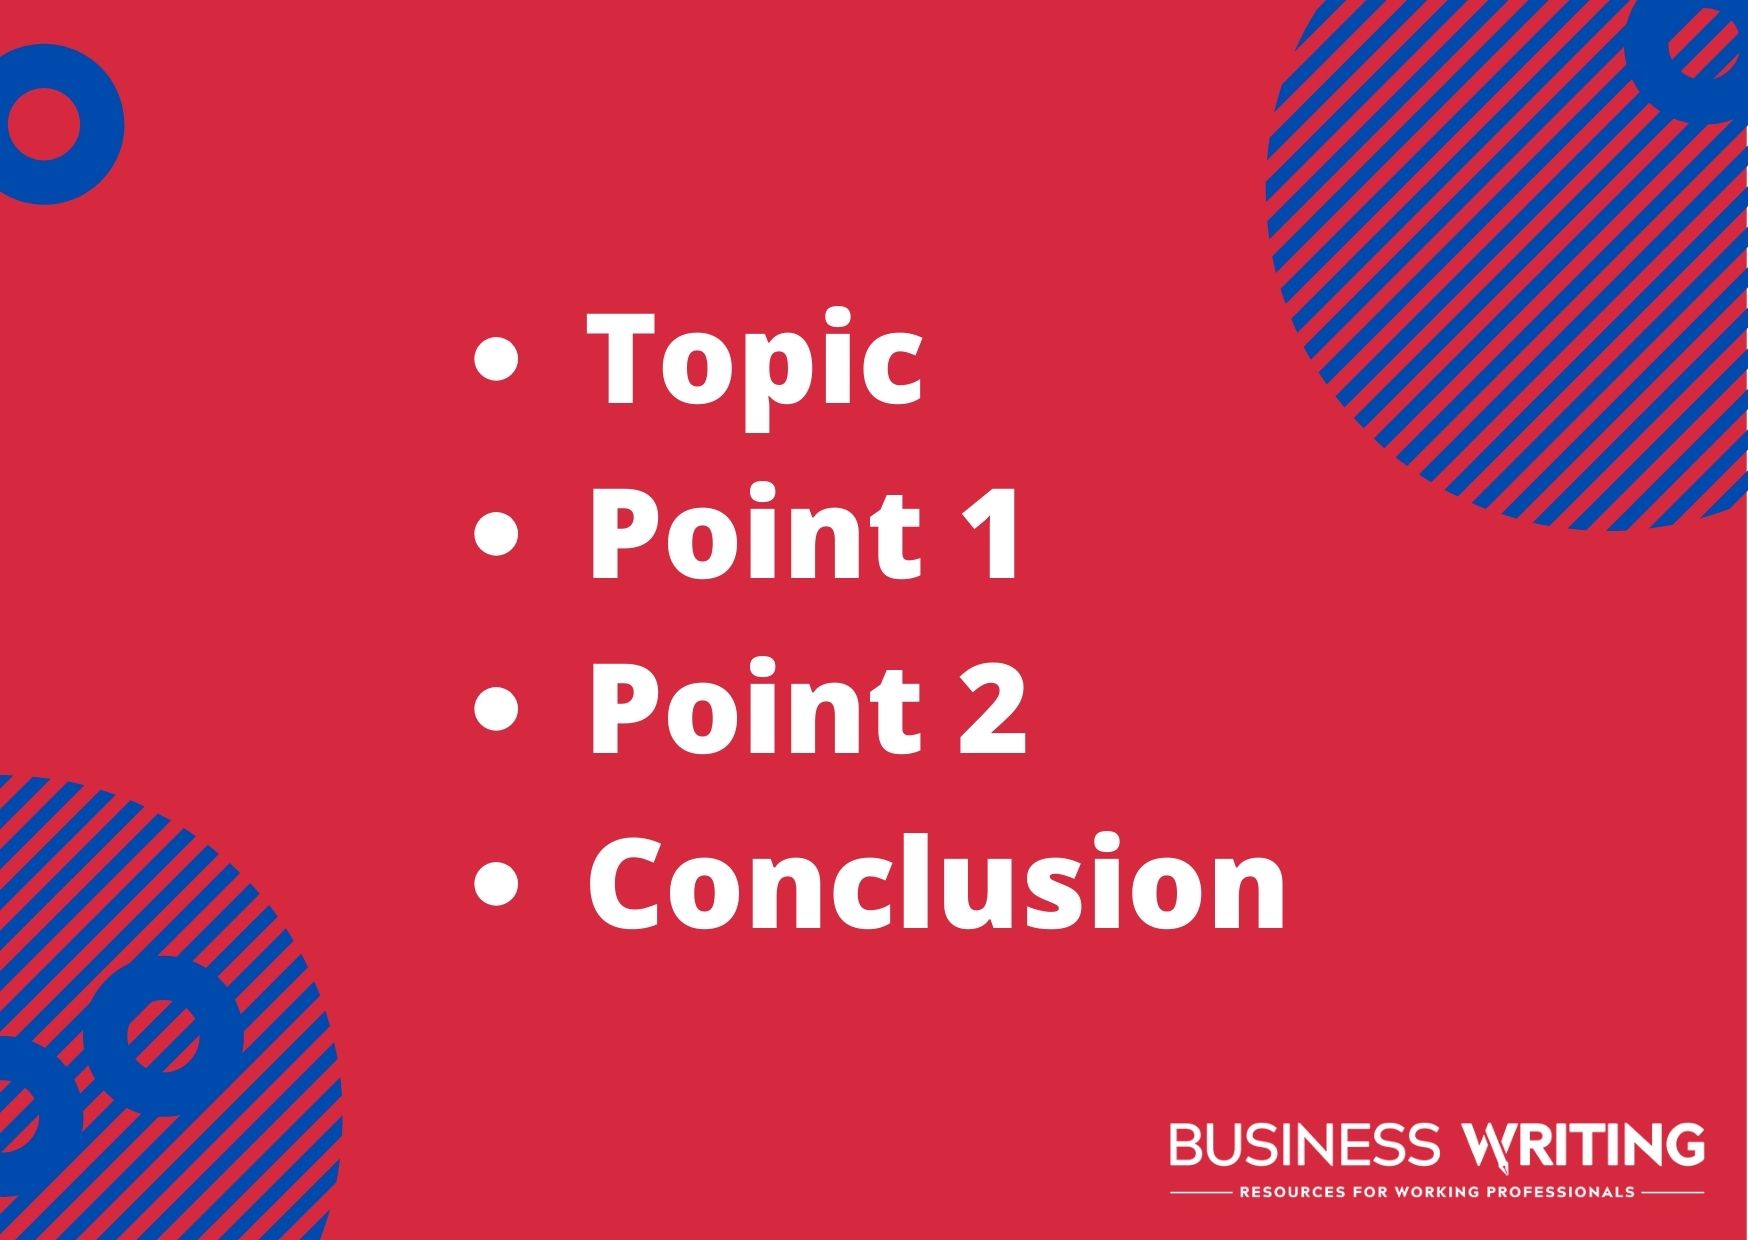 An outline to help you get to the point in writing: Topic, Point 1, Point 2, Conclusion